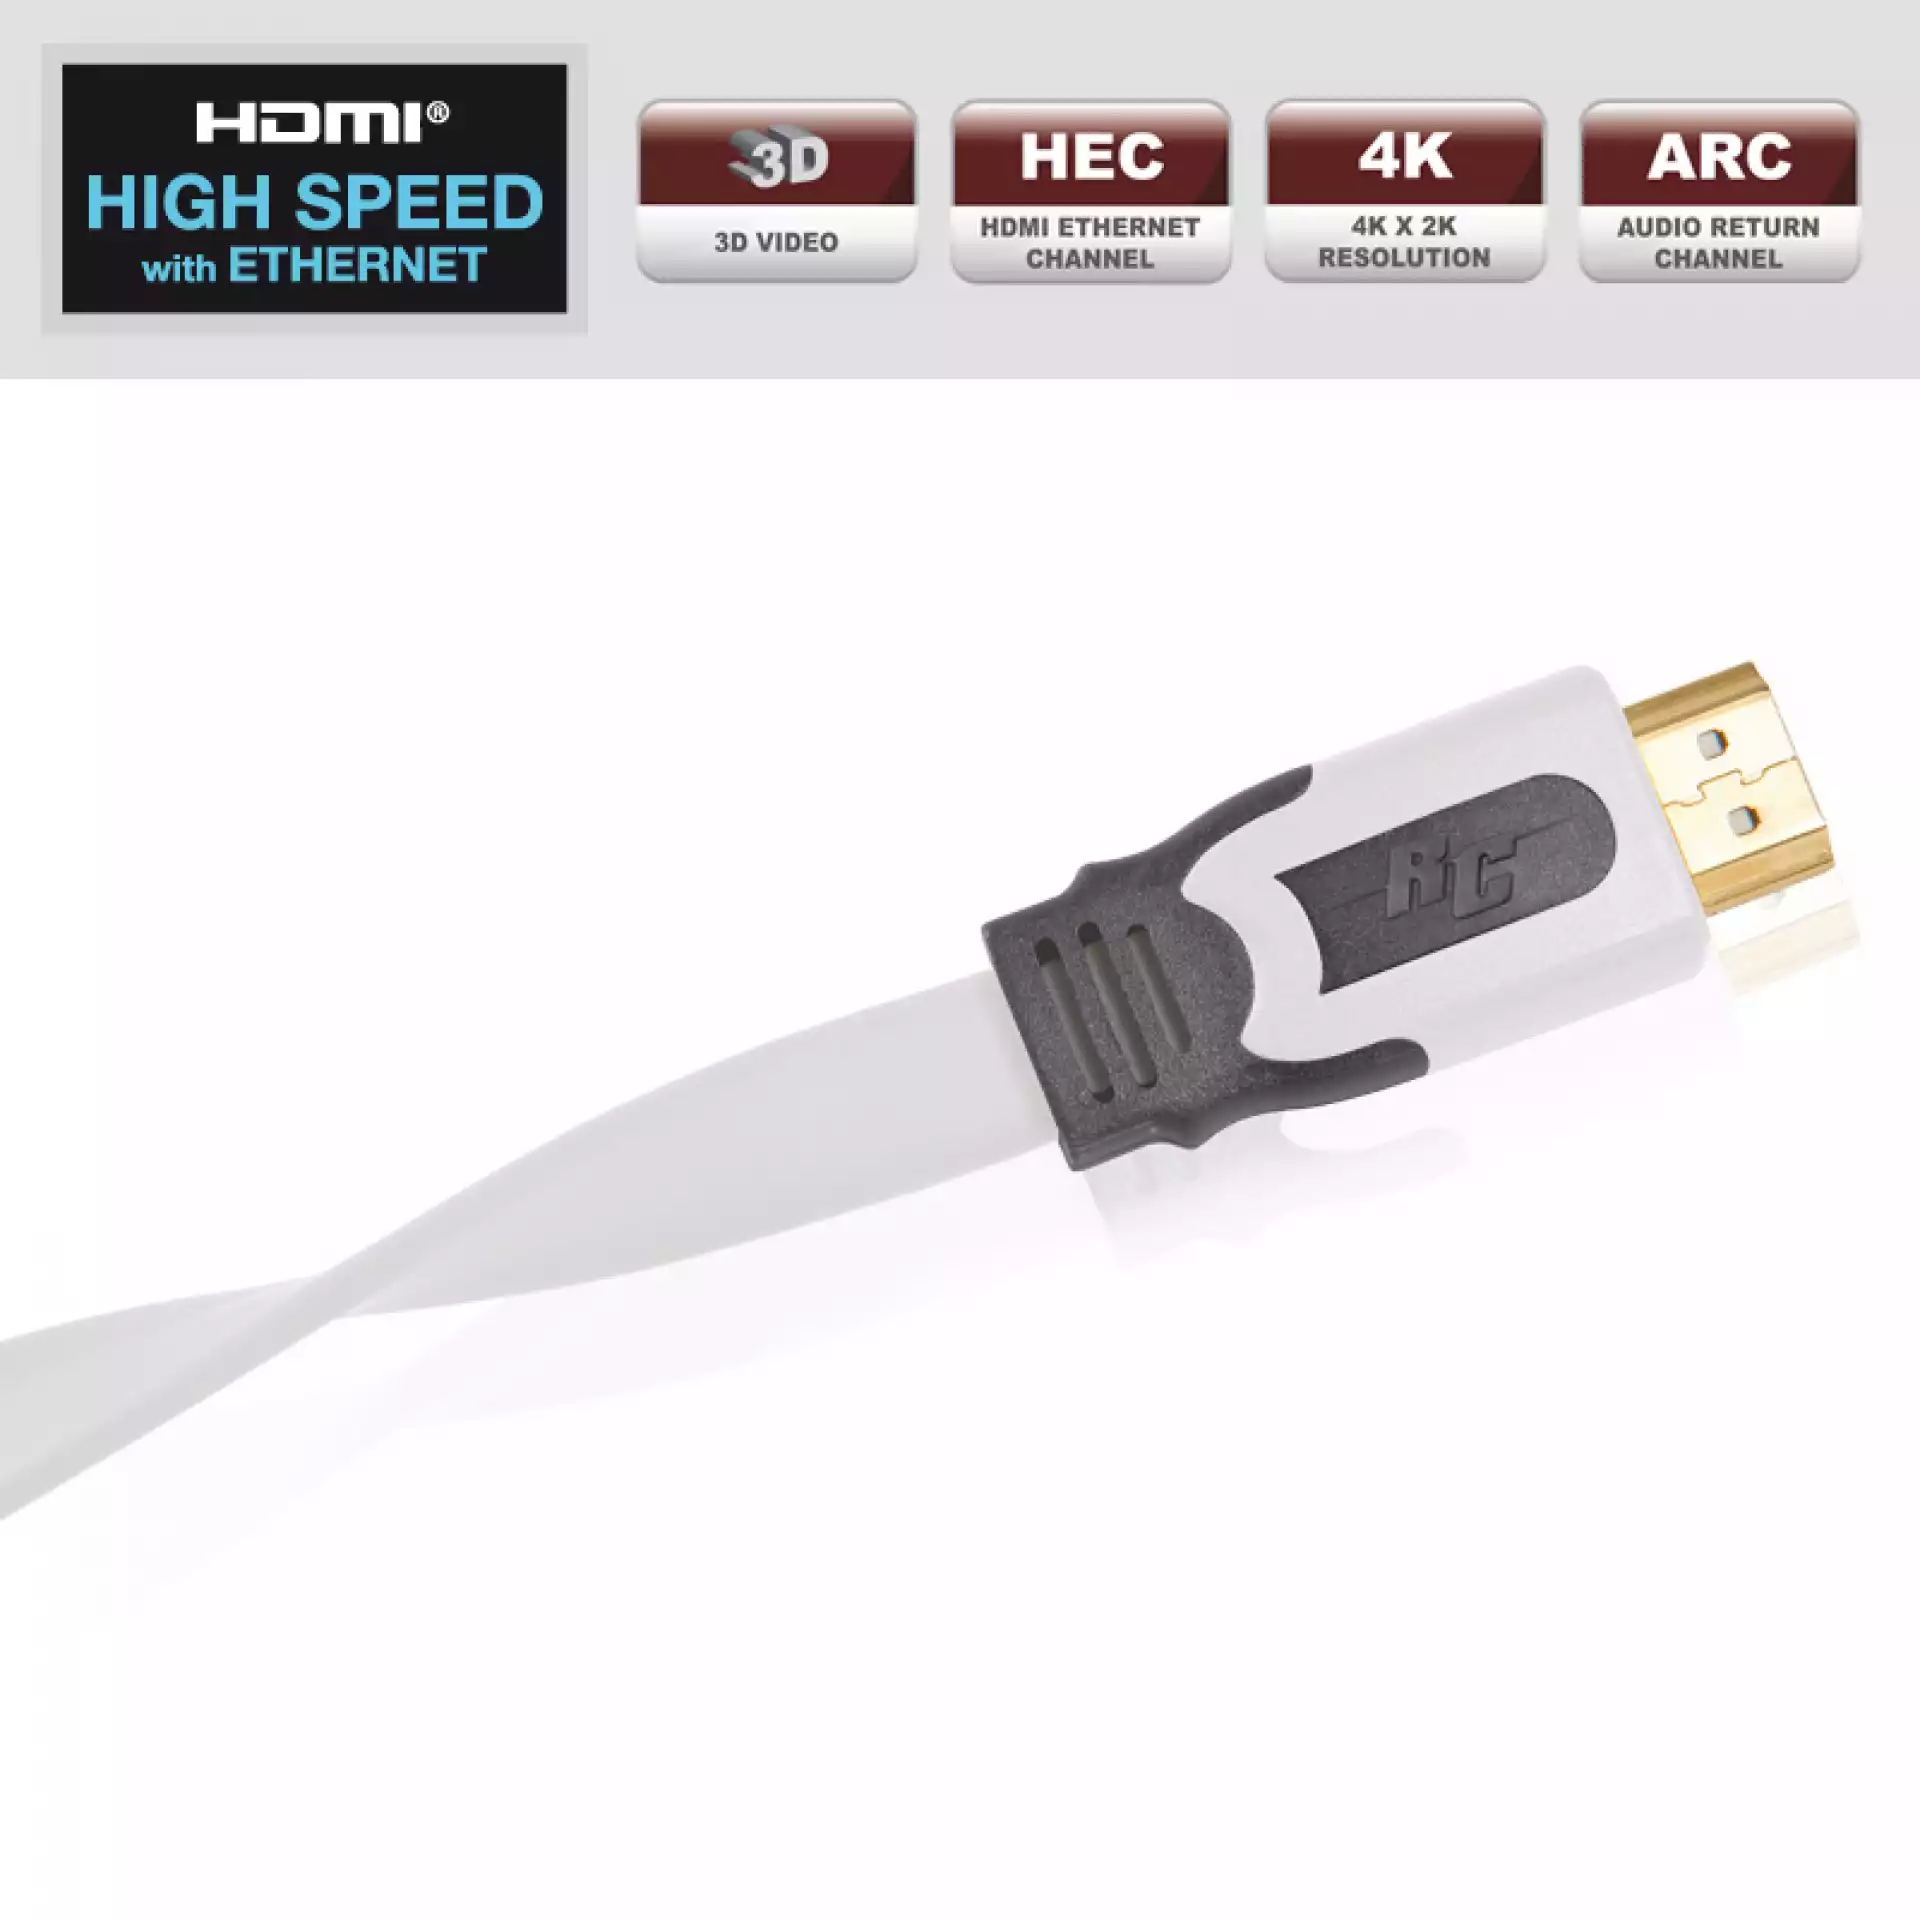 REAL CABLE HD E SNOW FLAT 2m